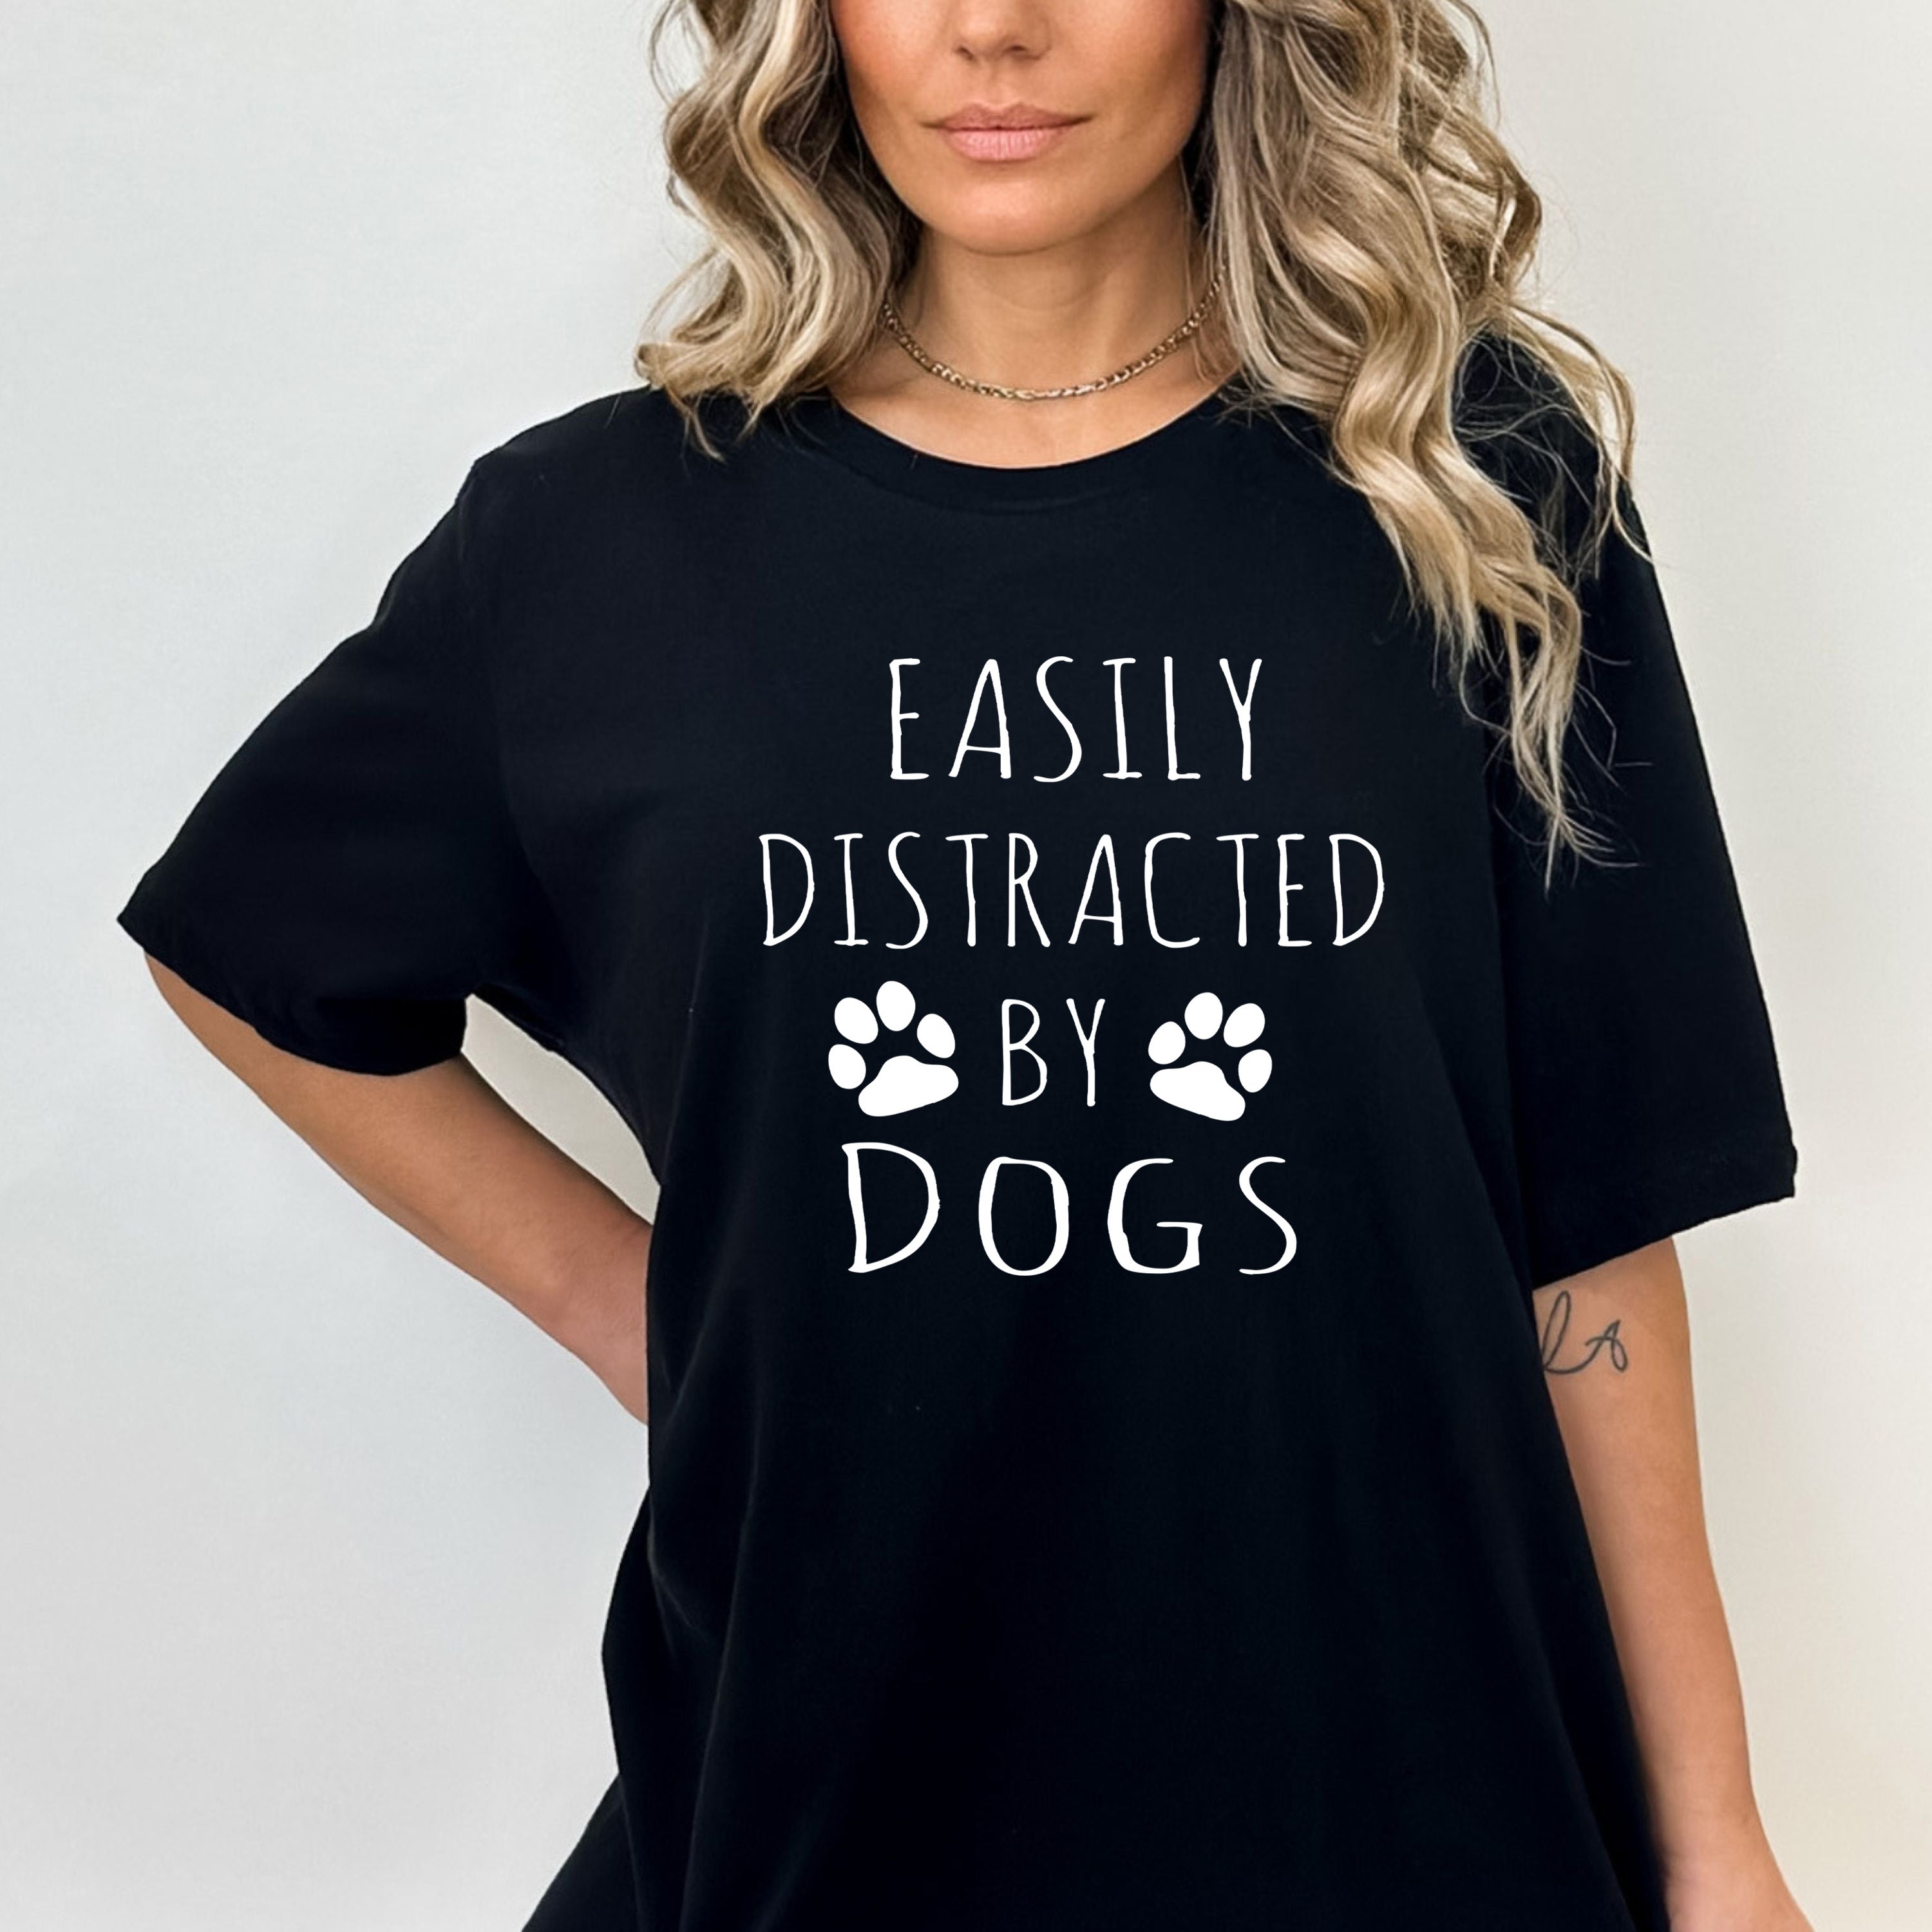 Easily Distracted By Dogs - Bella Canvas